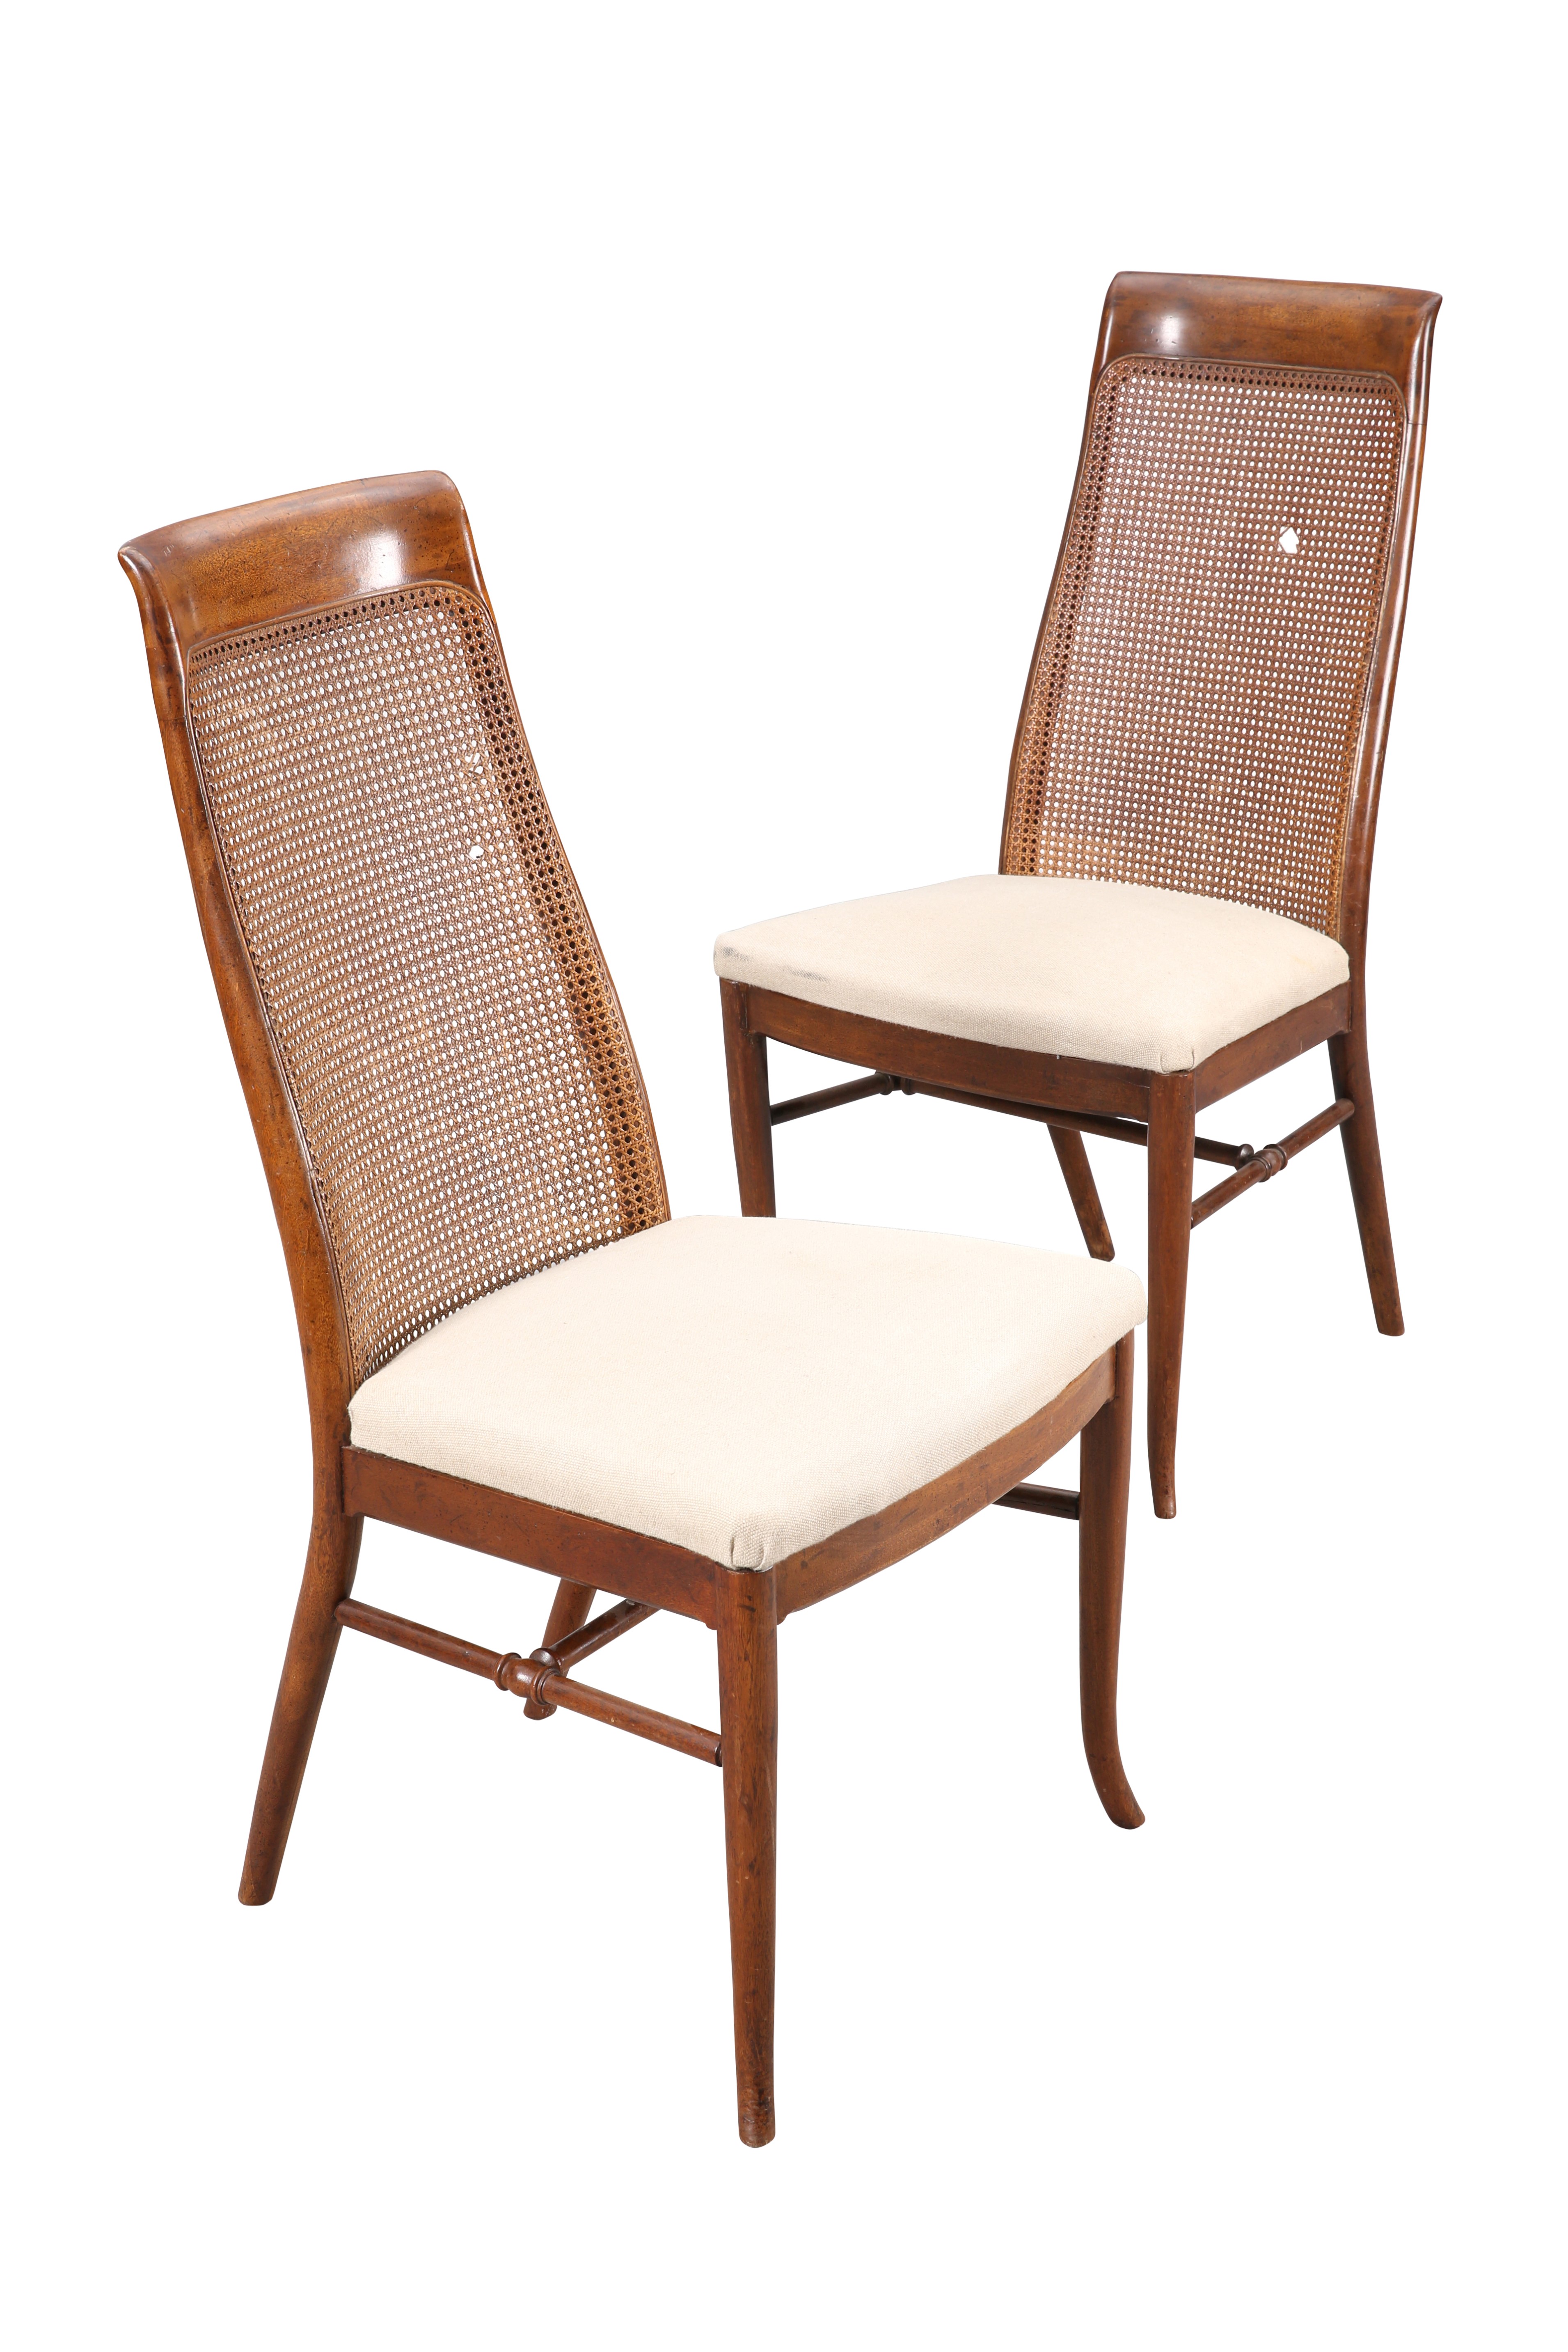 A PAIR OF SCOTTISH STAINED BEECH AND CANEWORK CHAIRS